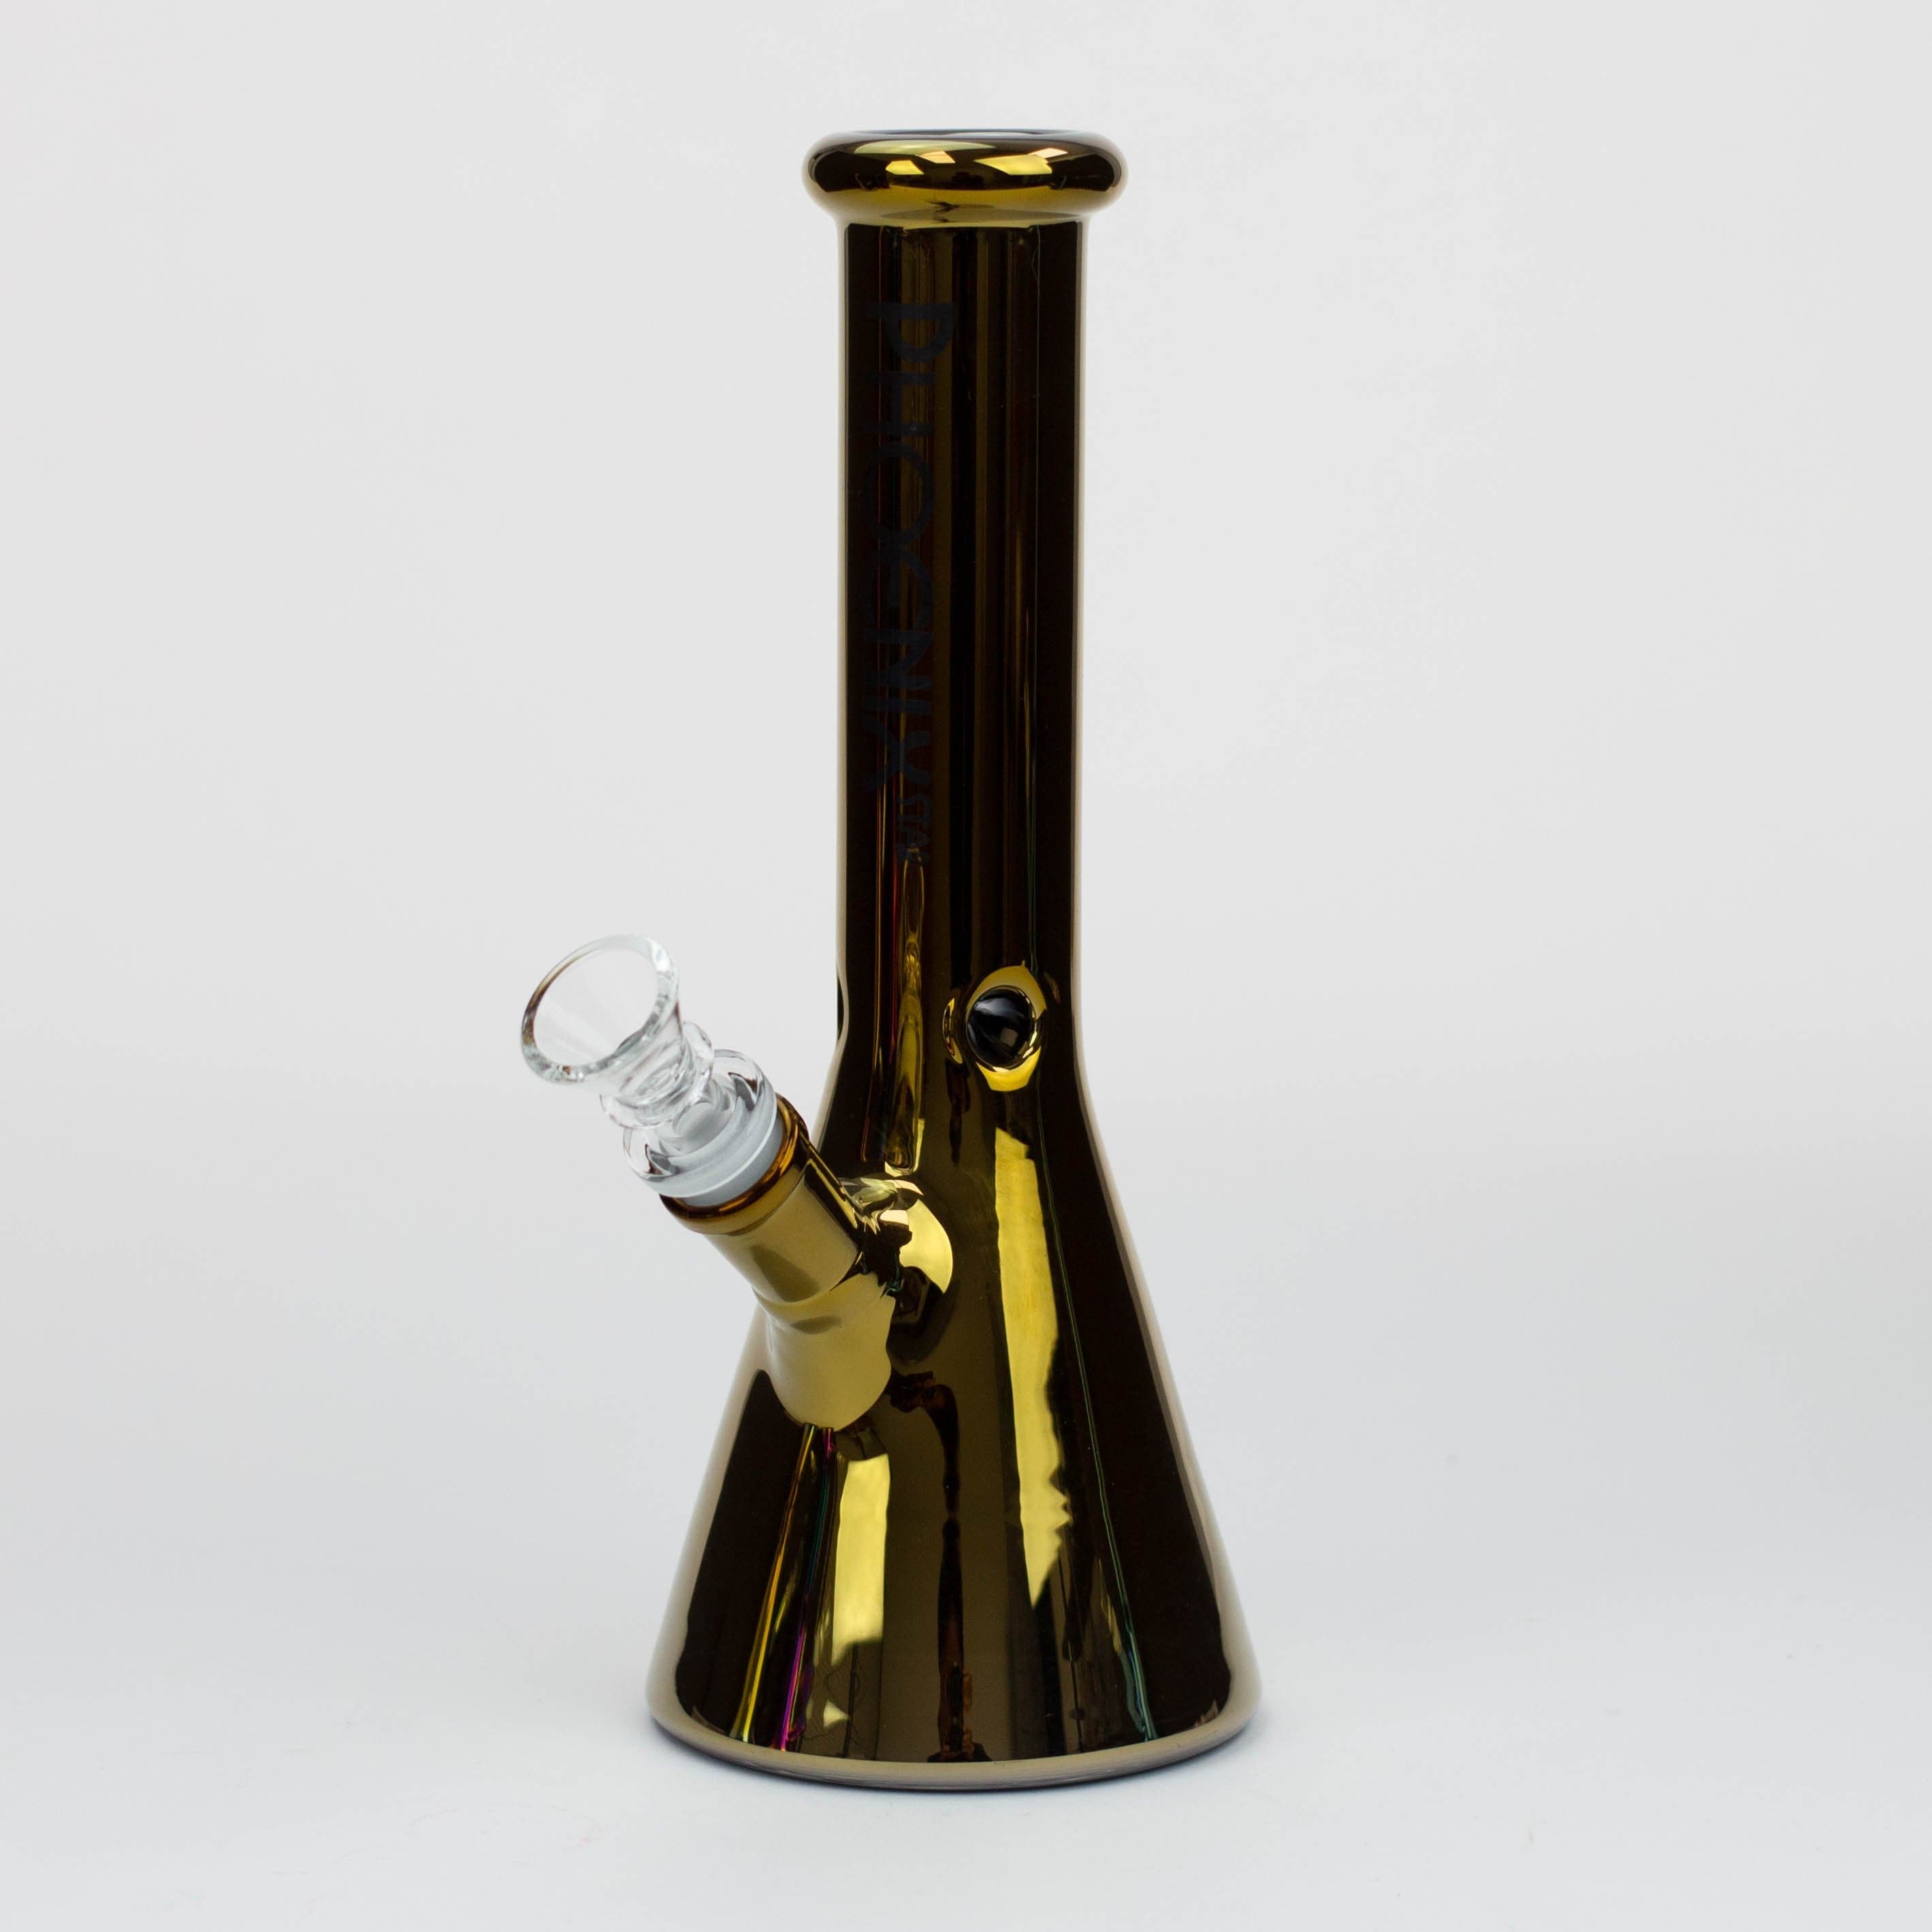 PHOENIX STAR 10" Electrooplated glass water pipes_6